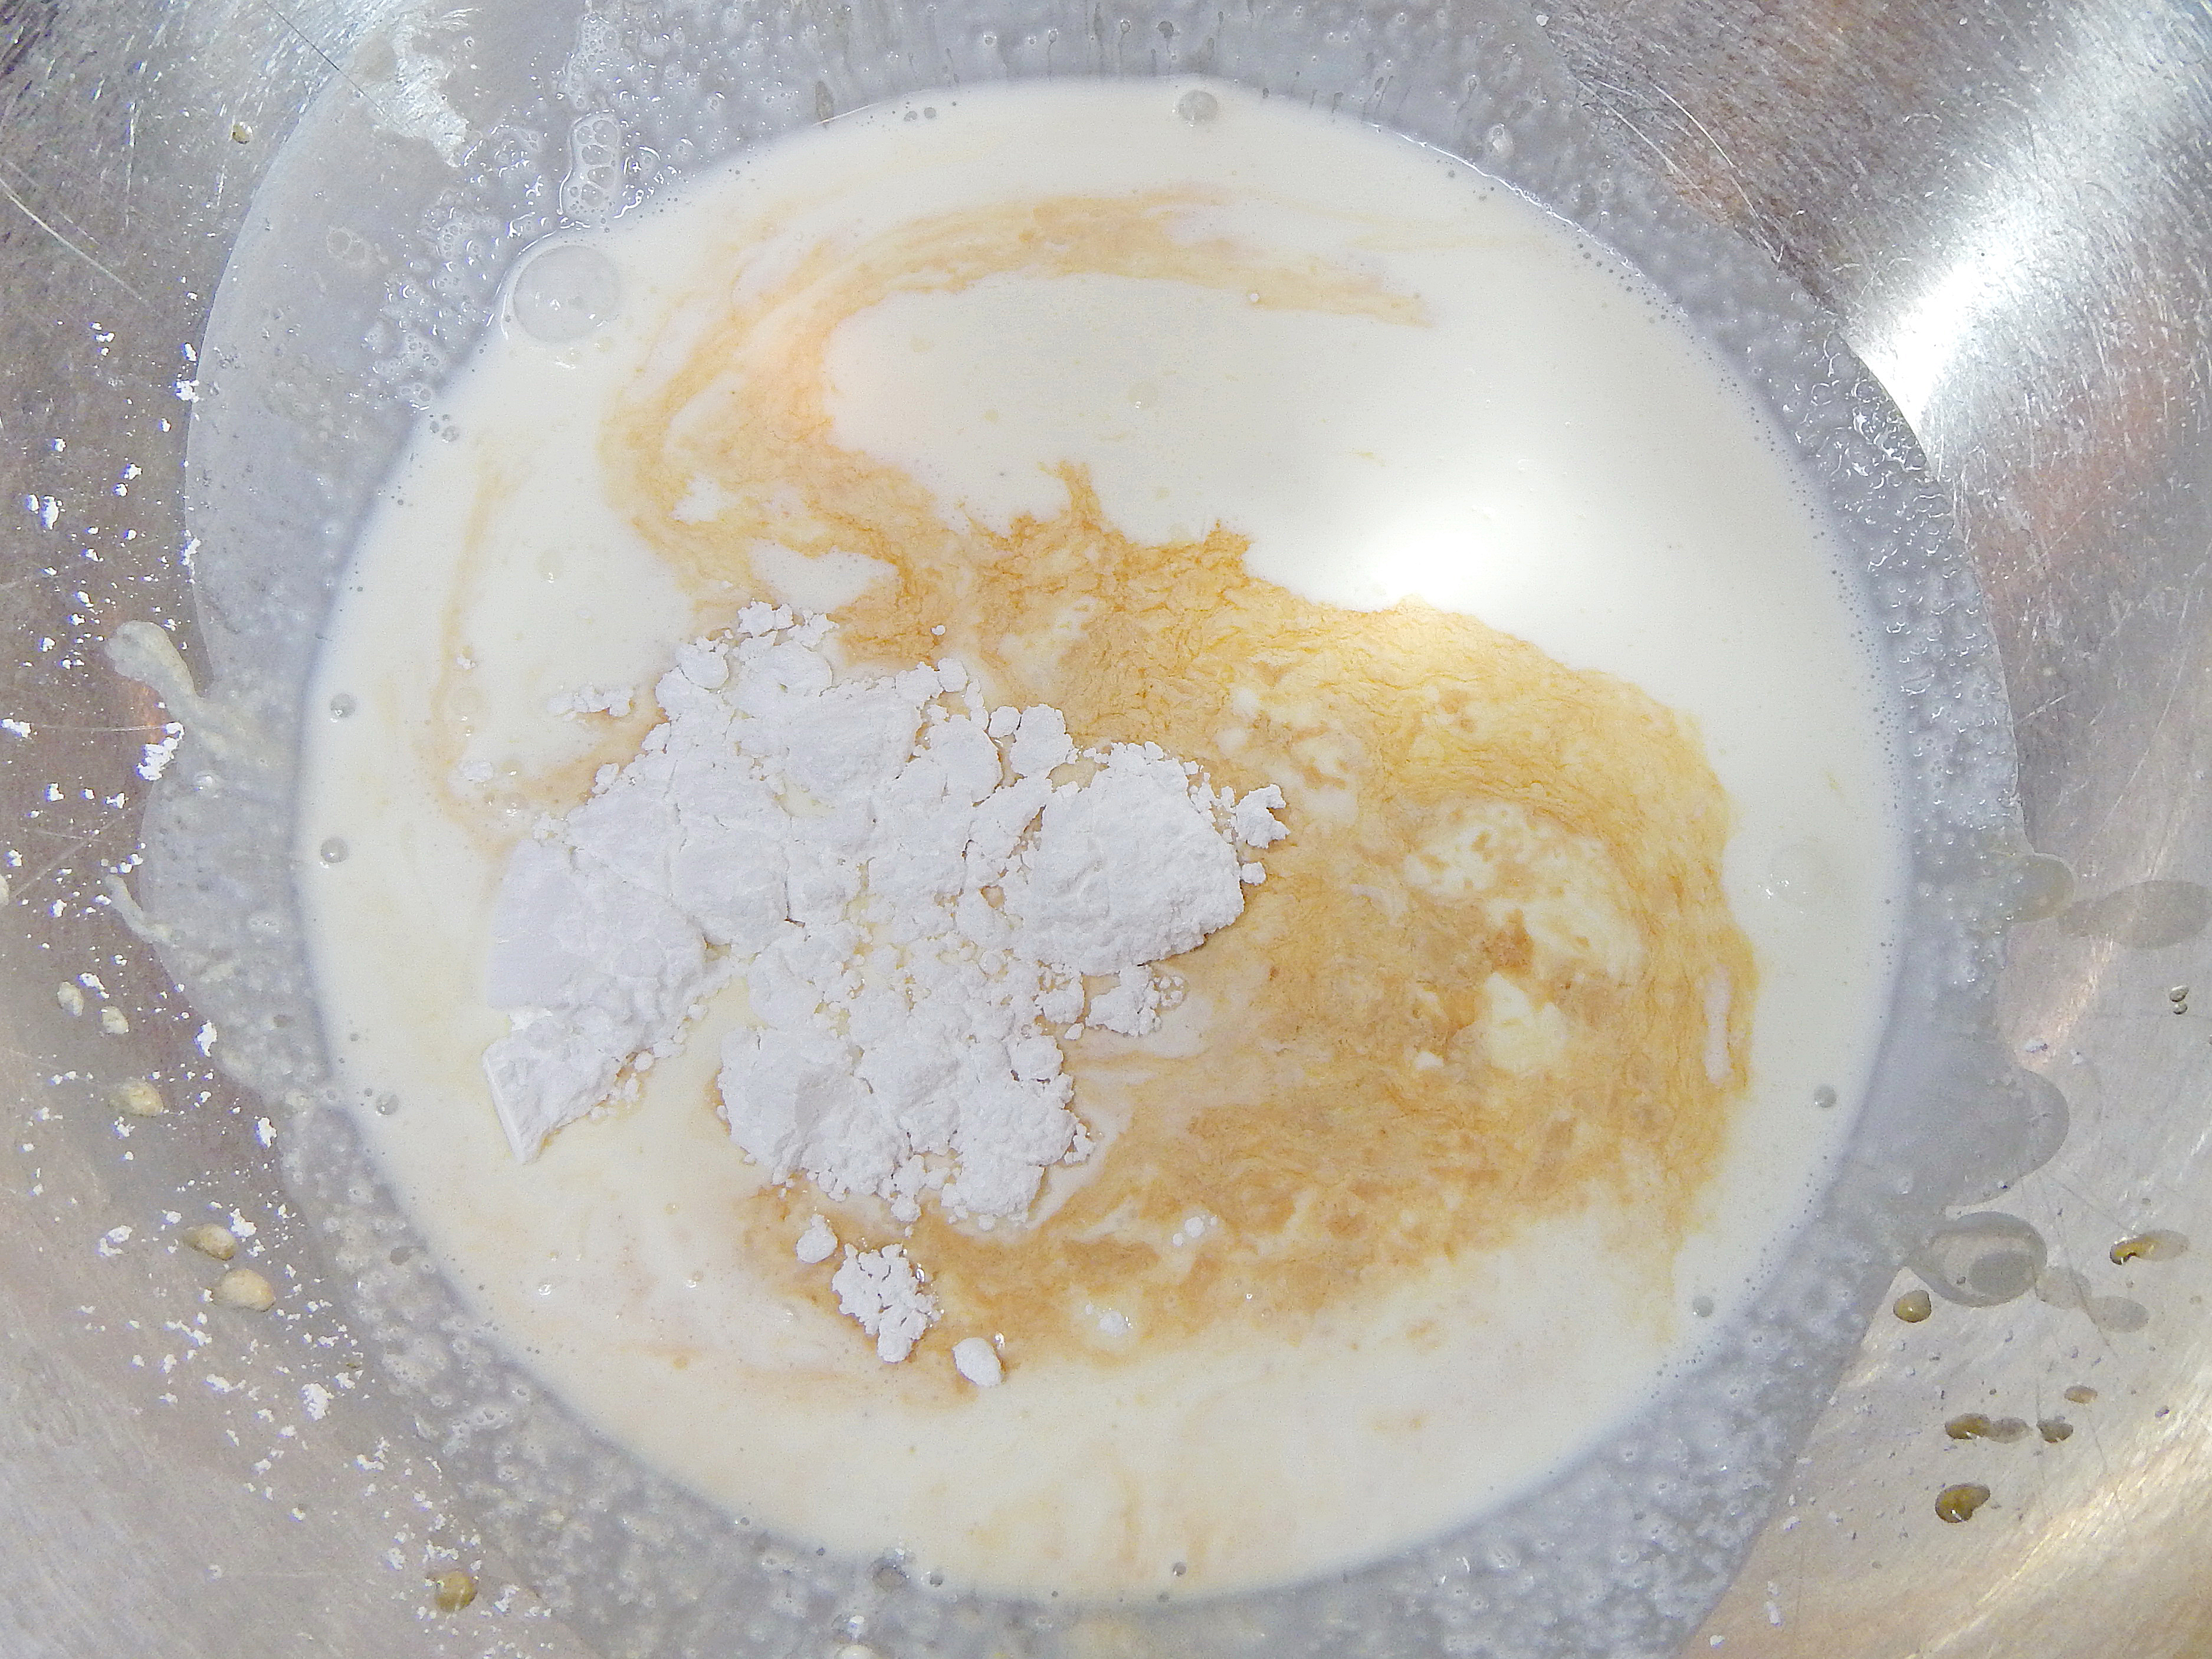 Whipped Cream Ingredients in Bowl